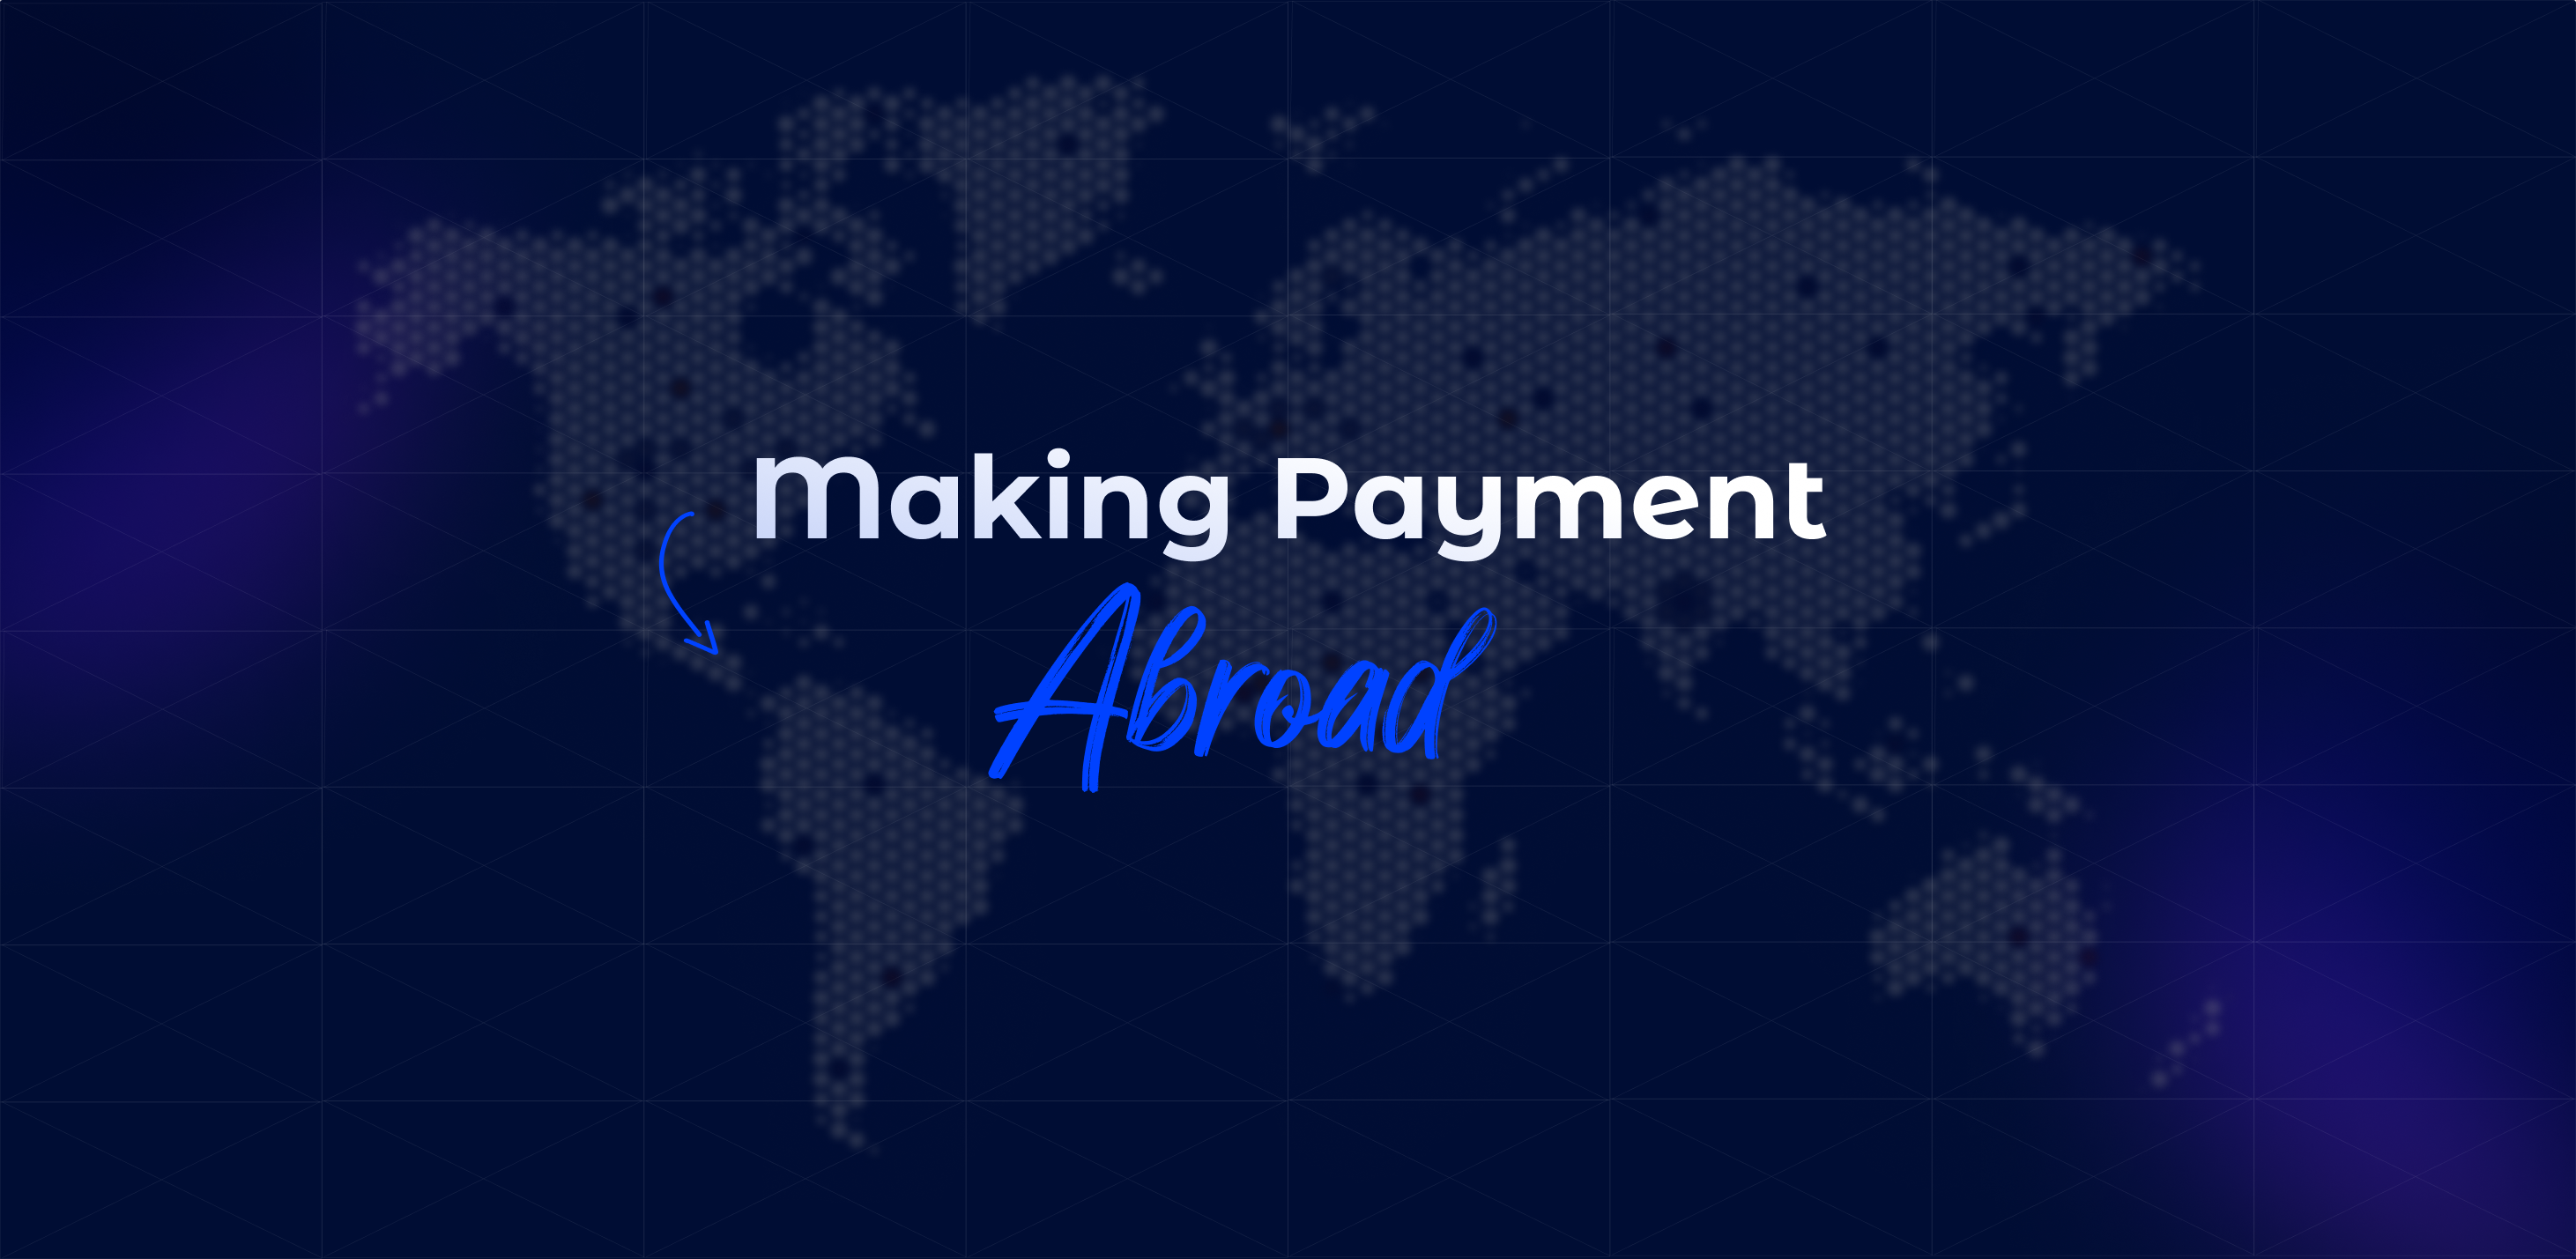 Making Payment Abroad